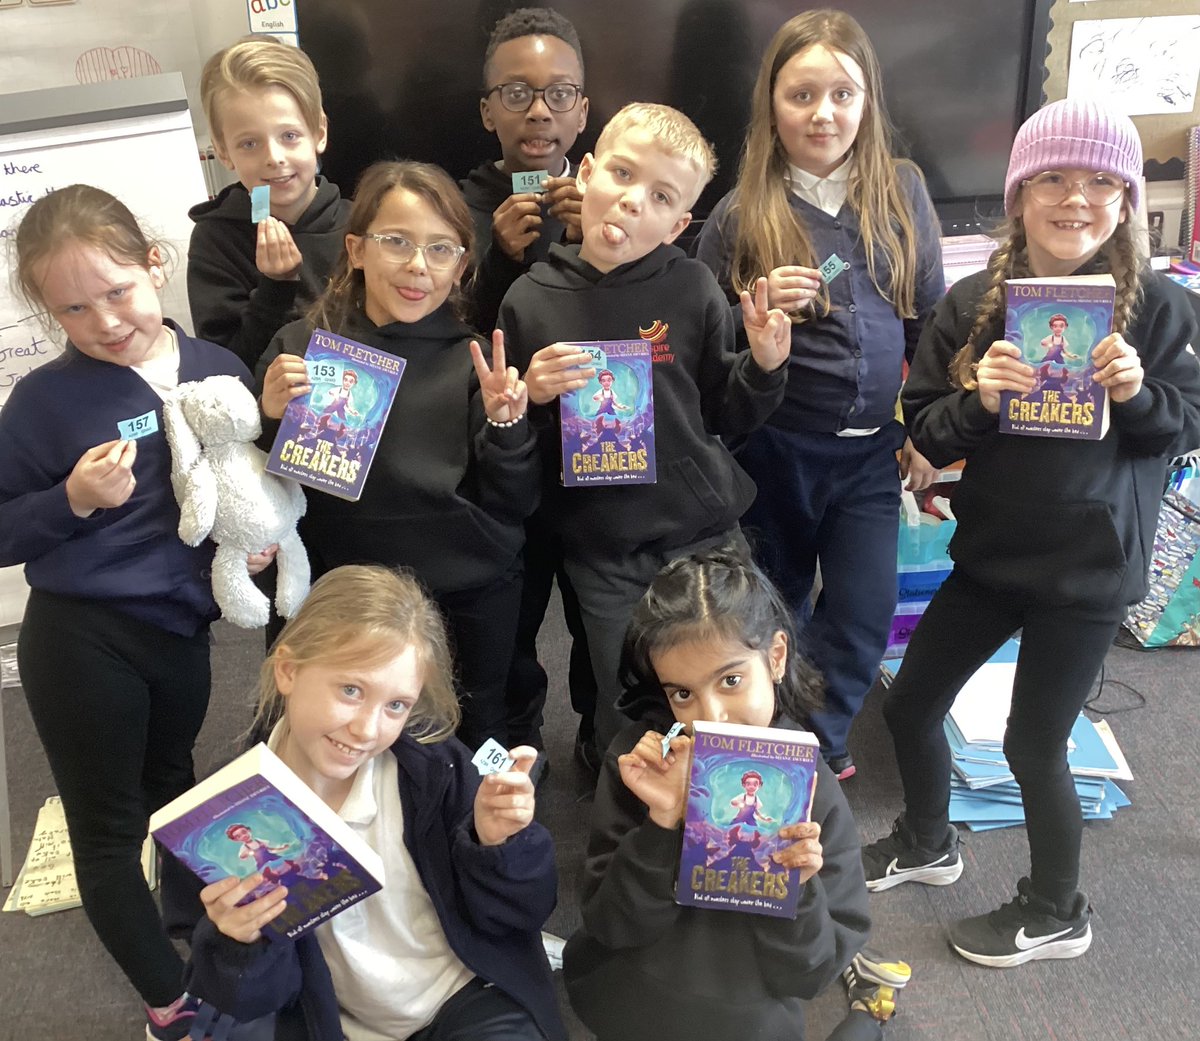 🤩📚😍 Our new class novel is The Creakers by @TomFletcher. We loved reading the spooky opening today! What would happen if all the grown-ups disappeared? I was worried when I asked some of the children in Y3A! 😍📚🤩 @Inspire_Ashton @TrustVictorious @Inspired_ToRead